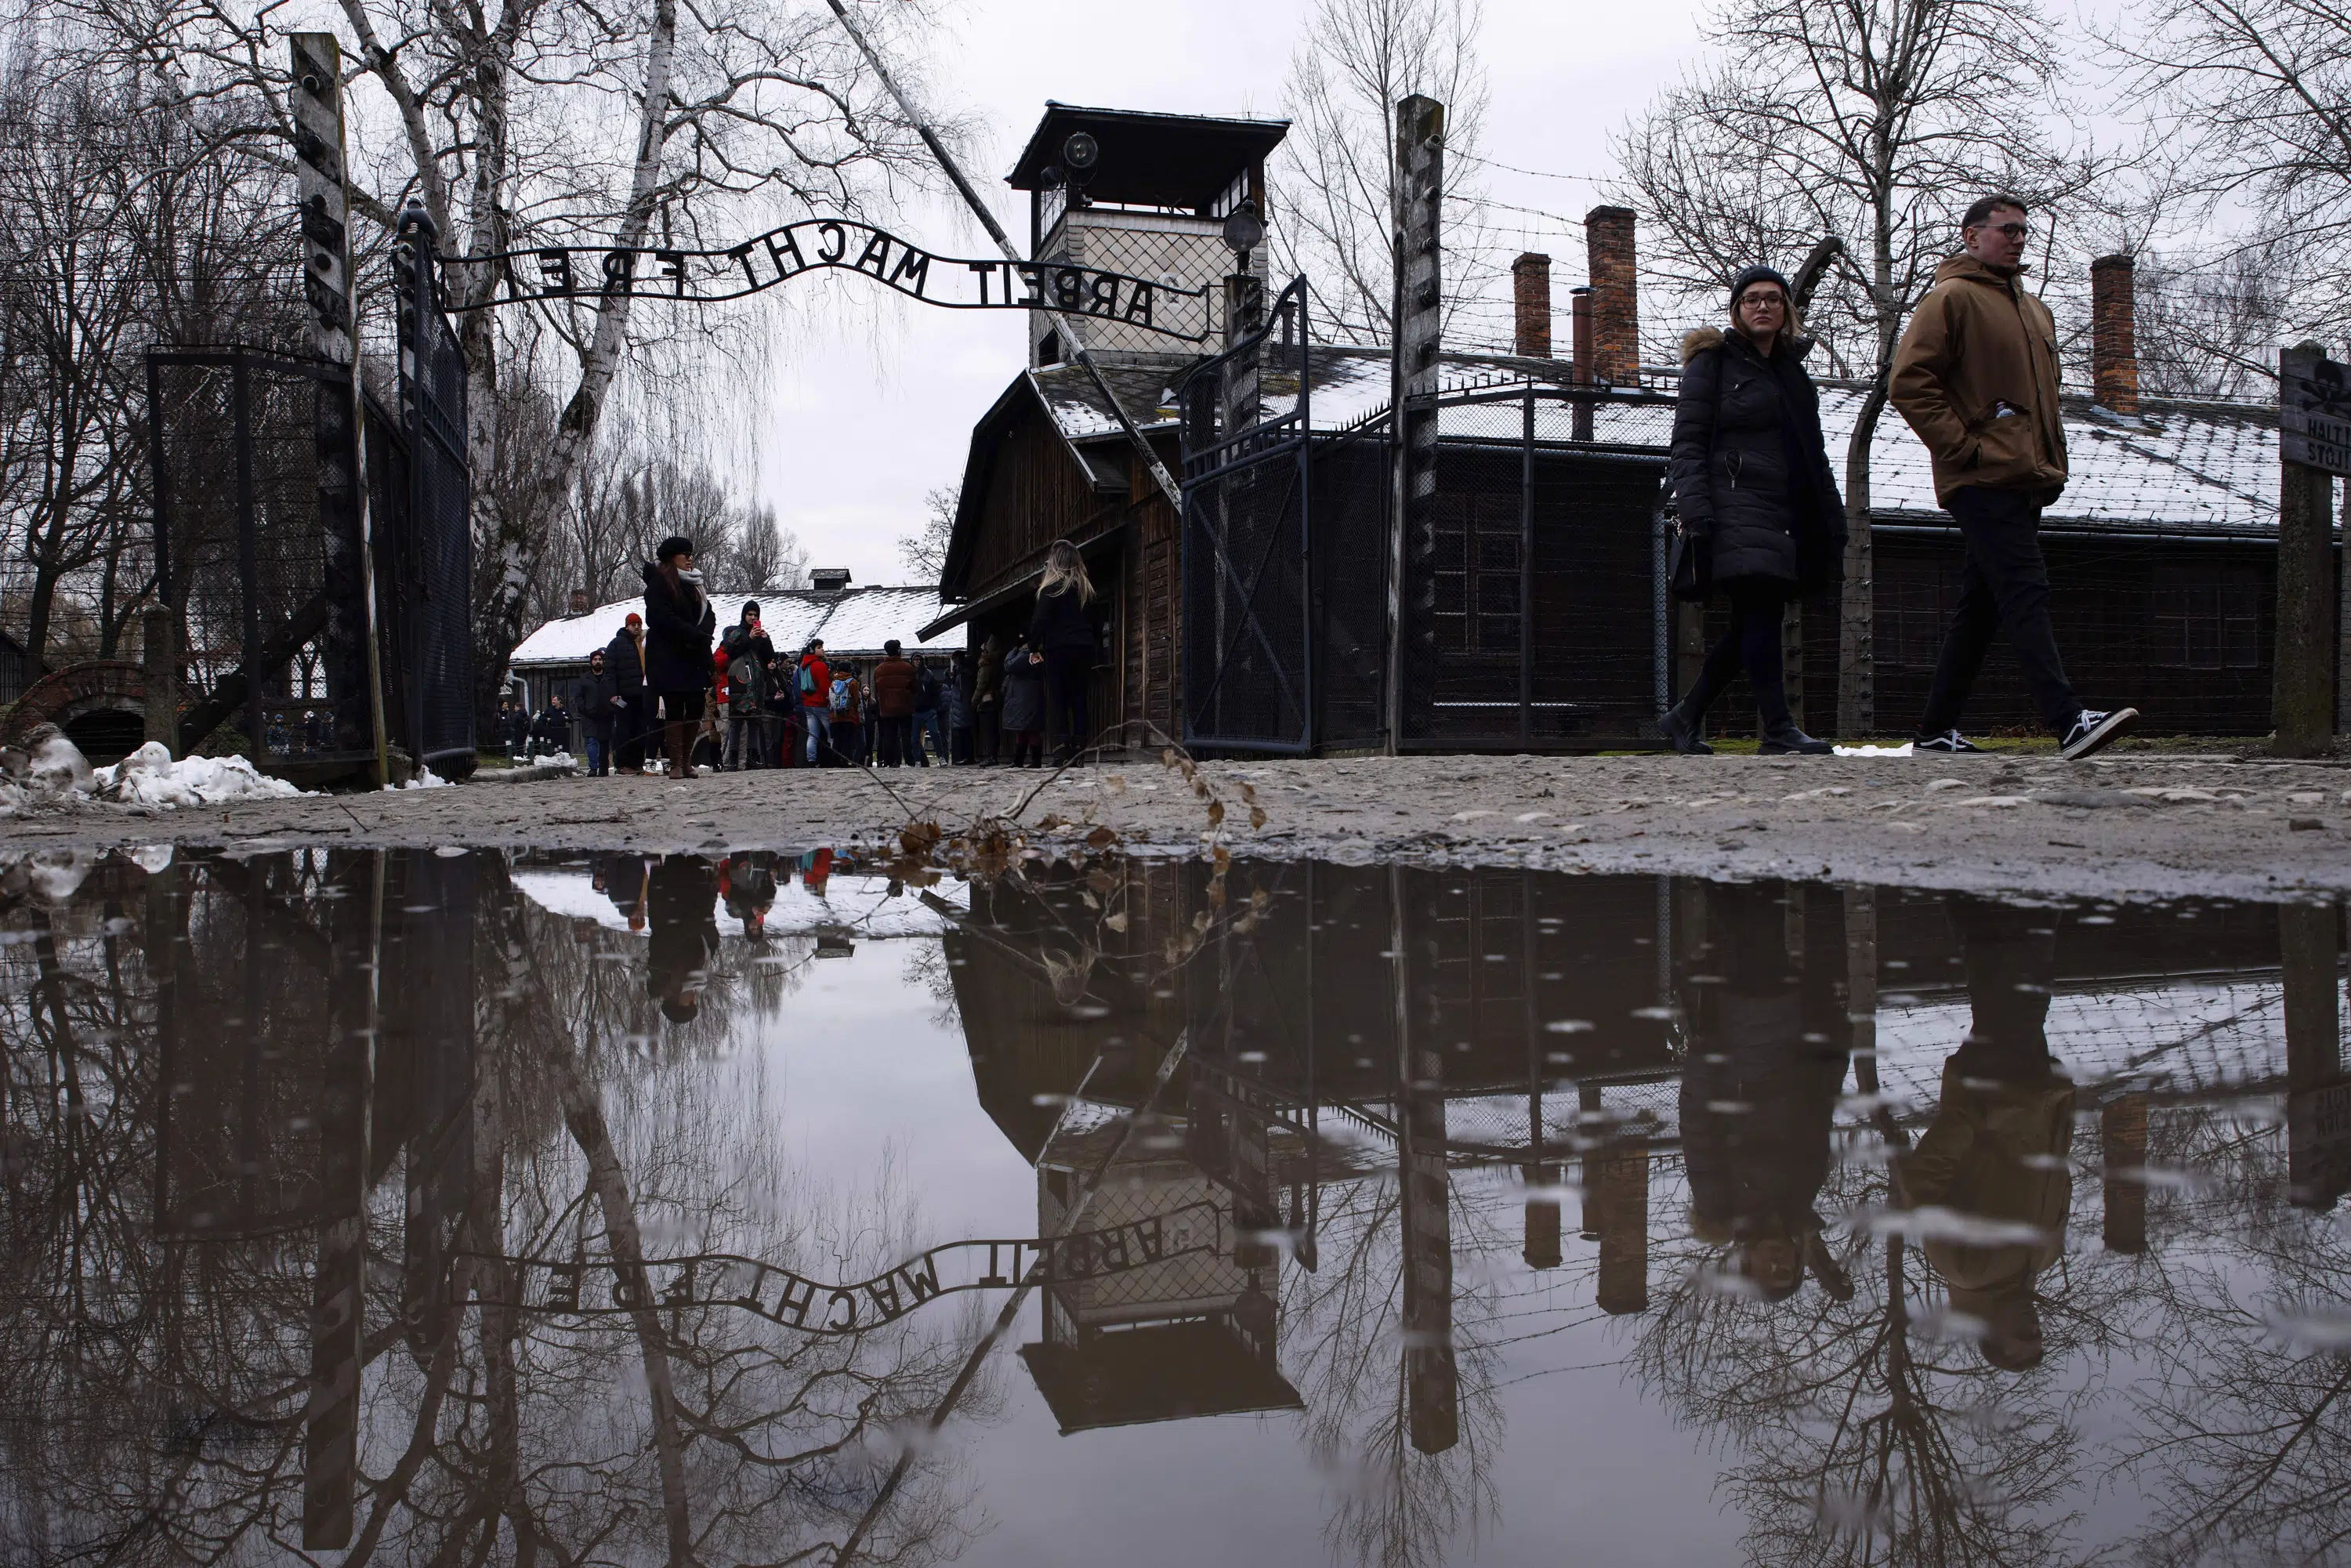 Auschwitz anniversary marked as peace again shattered by war